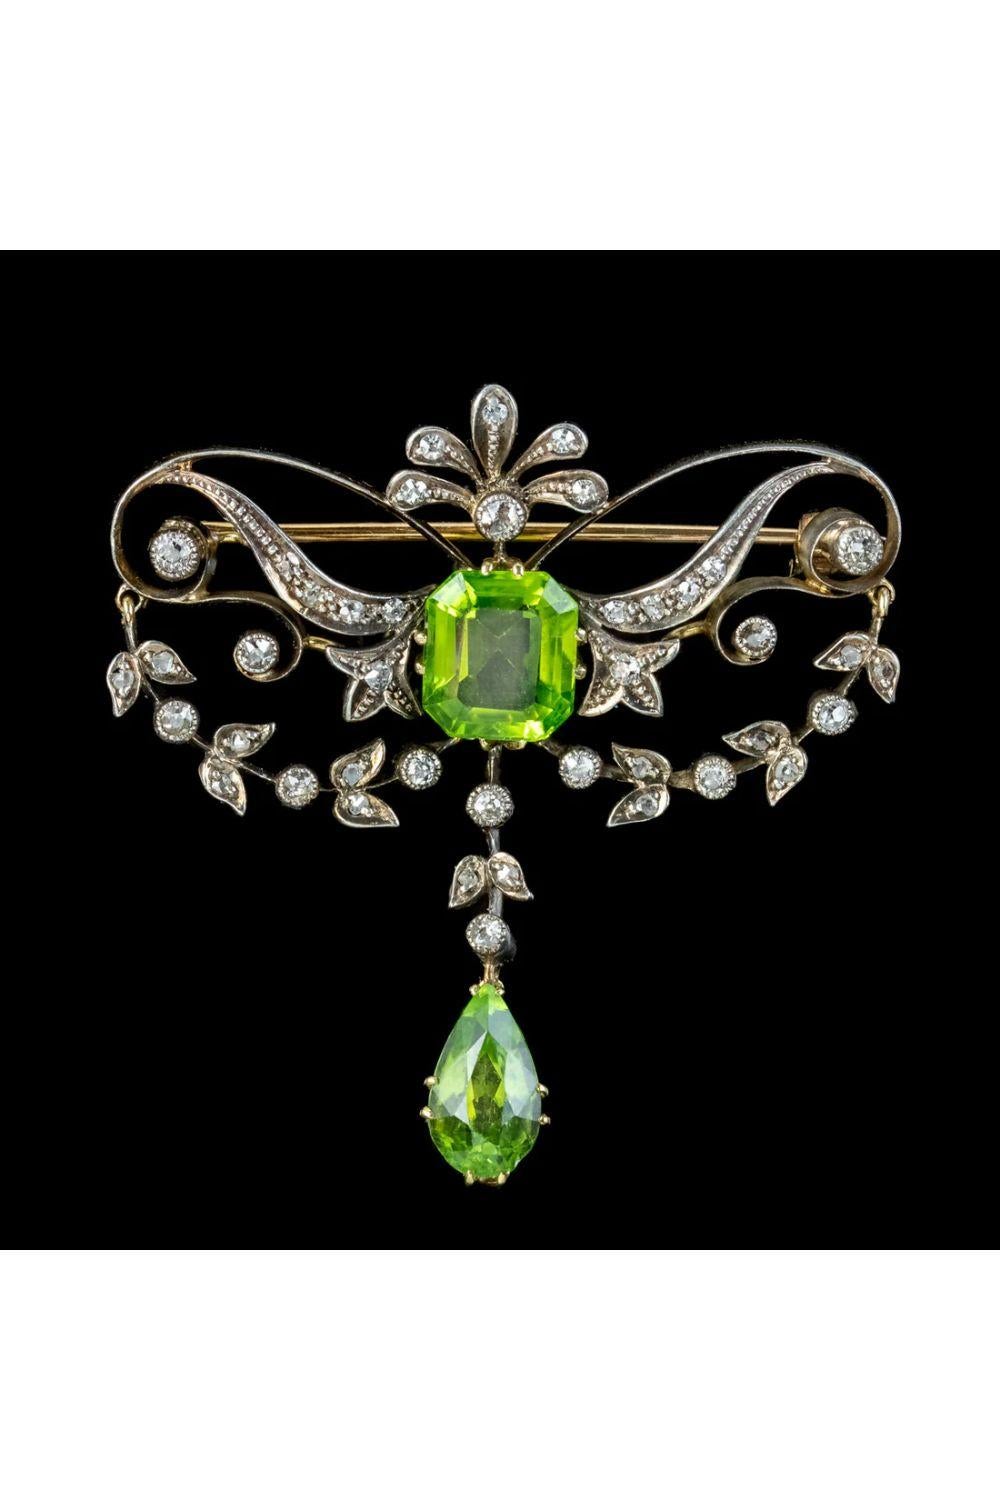 A beautiful antique Edwardian brooch made in the Art Nouveau style with flowing curves and foliate garlands decorated with twinkling diamonds (approx. 1ct total) and two rich green peridots (approx. 5.5ct total). 

The largest peridot is a gorgeous